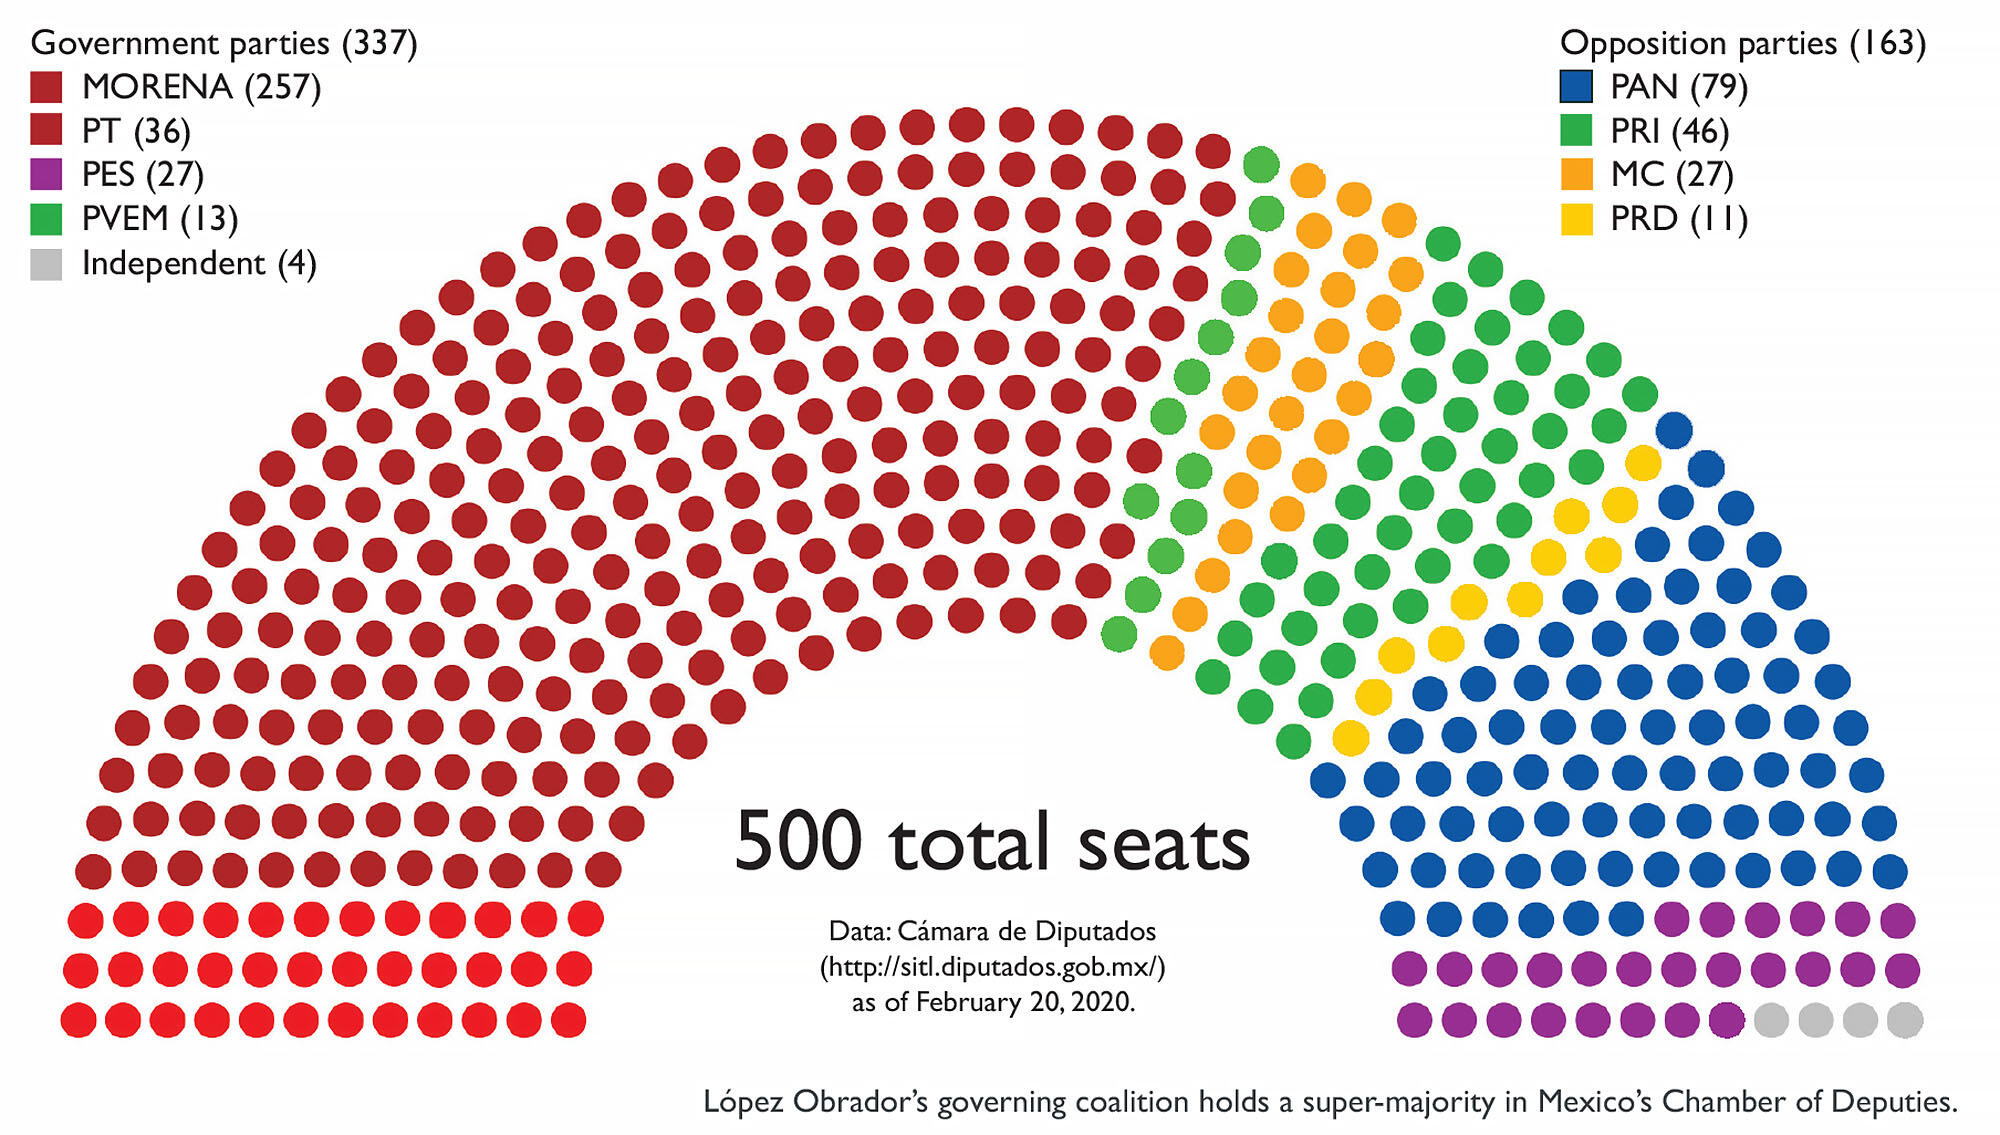 López Obrador’s governing coalition holds a super-majority in Mexico’s Chamber of Deputies.